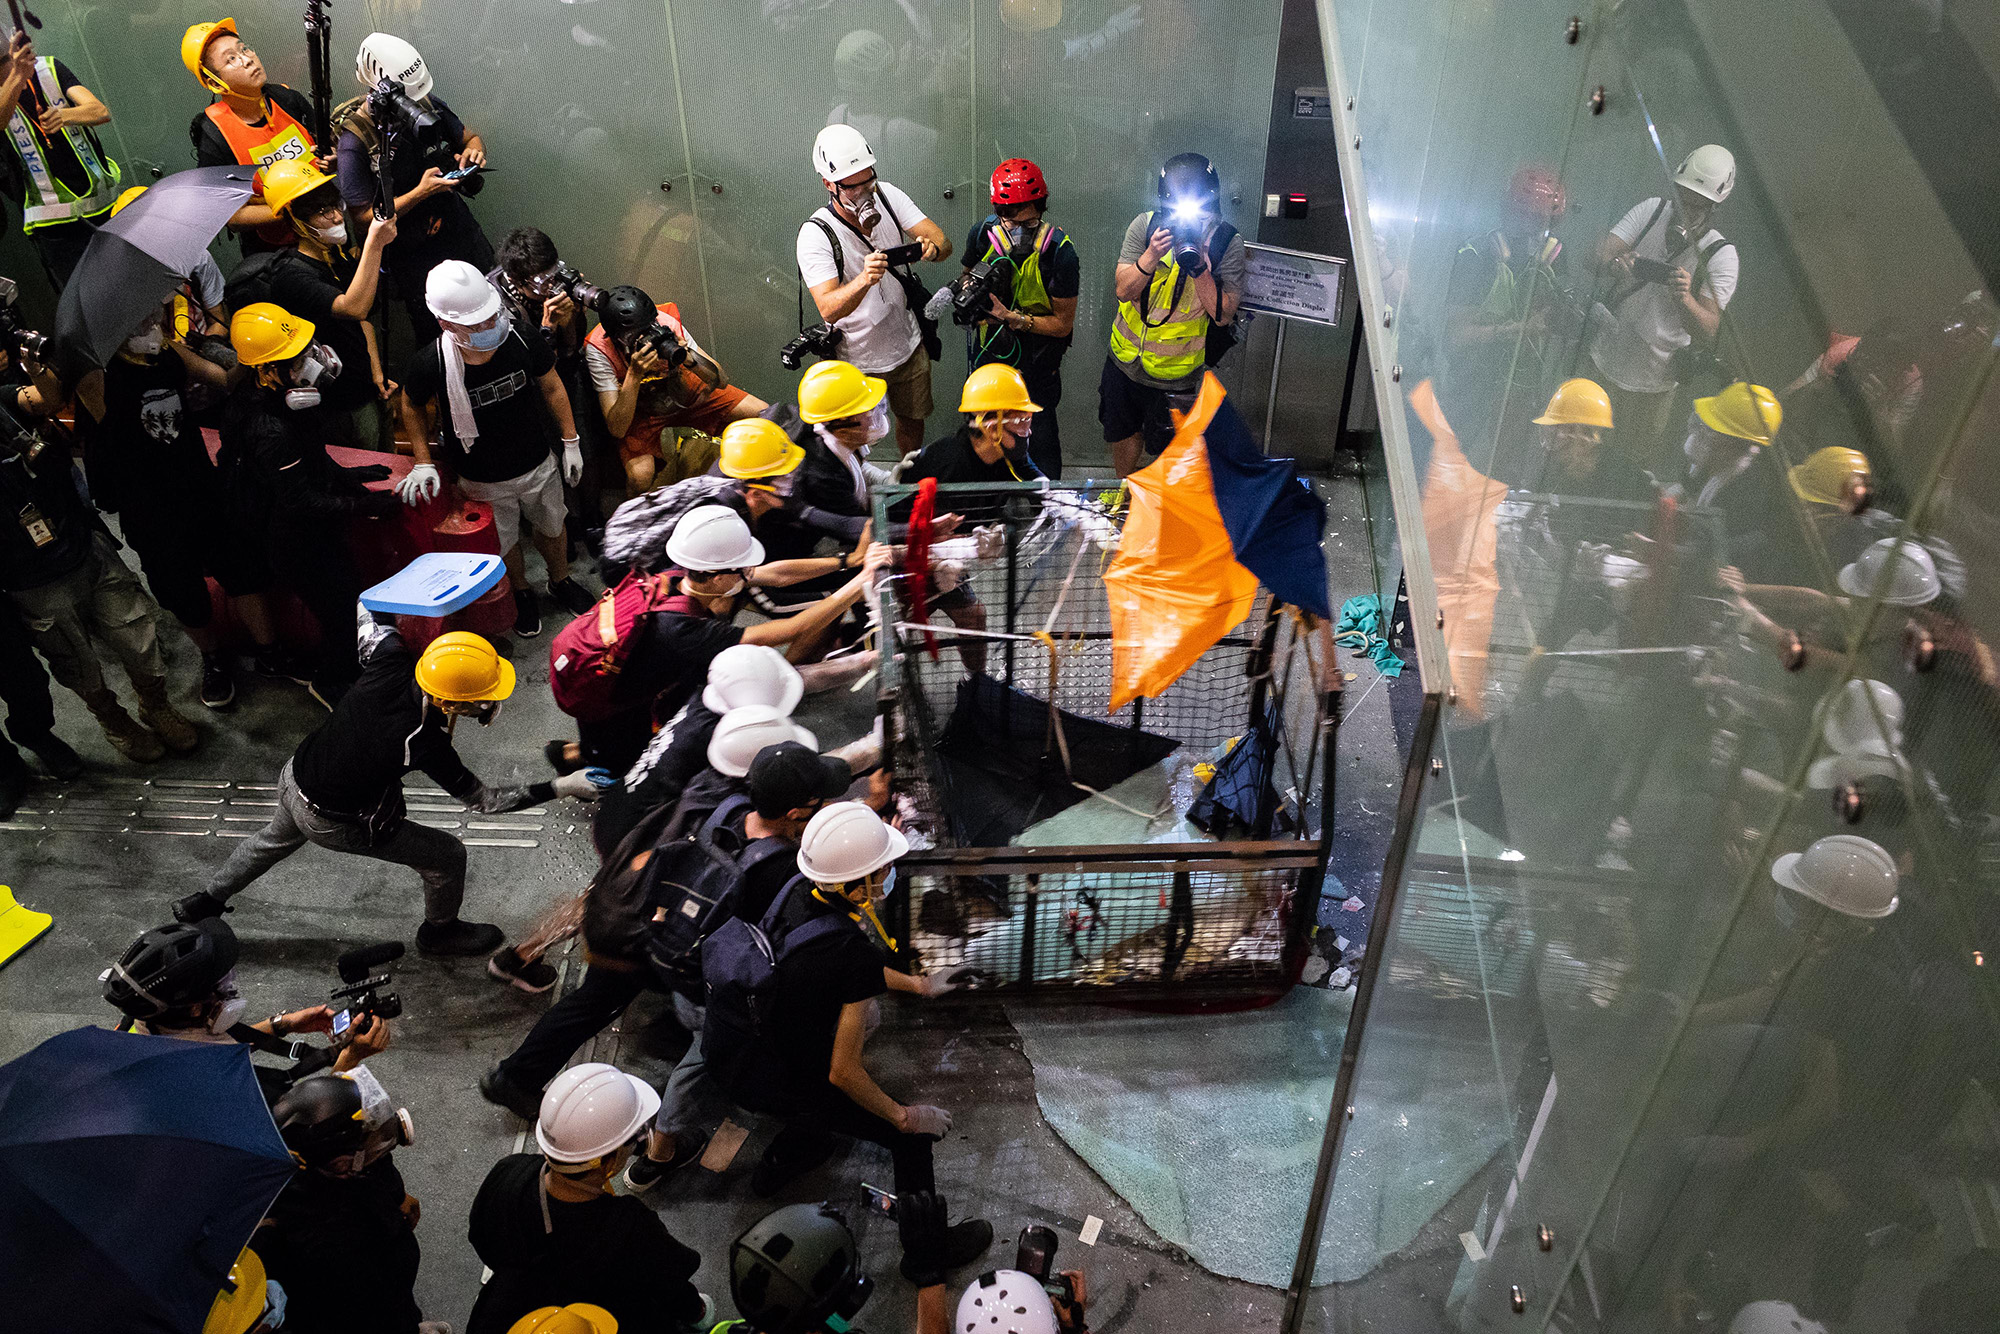 Demonstrators push a metal cart into a window into the Legislative Council building during a protest in Hong Kong, on Monday, July 1, 2019. 